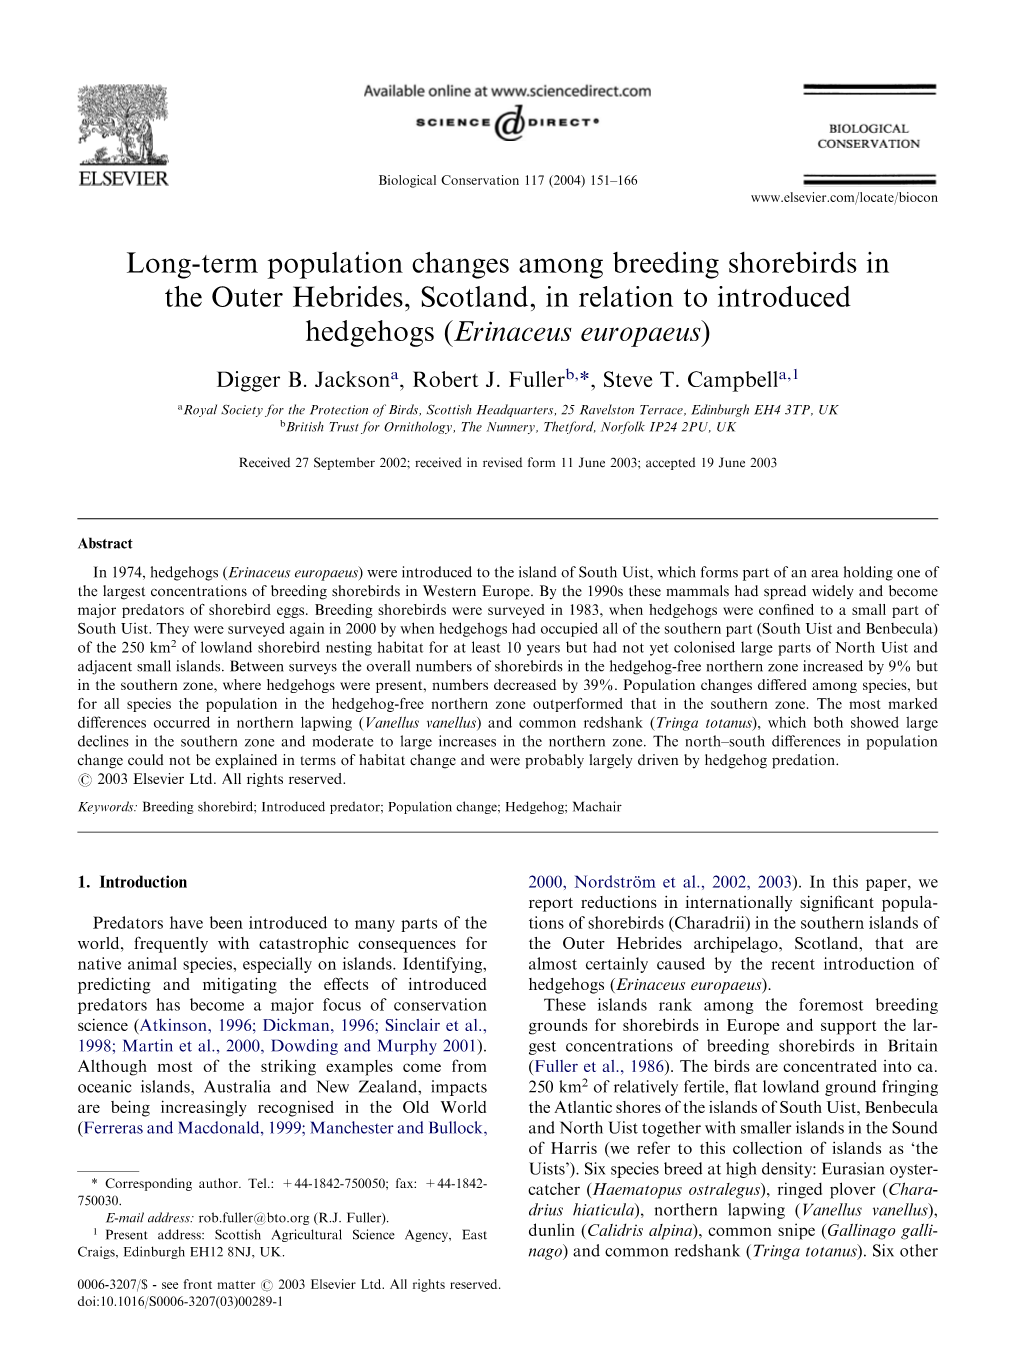 Long-Term Population Changes Among Breeding Shorebirds in the Outer Hebrides, Scotland, in Relation to Introduced Hedgehogs (Erinaceus Europaeus)